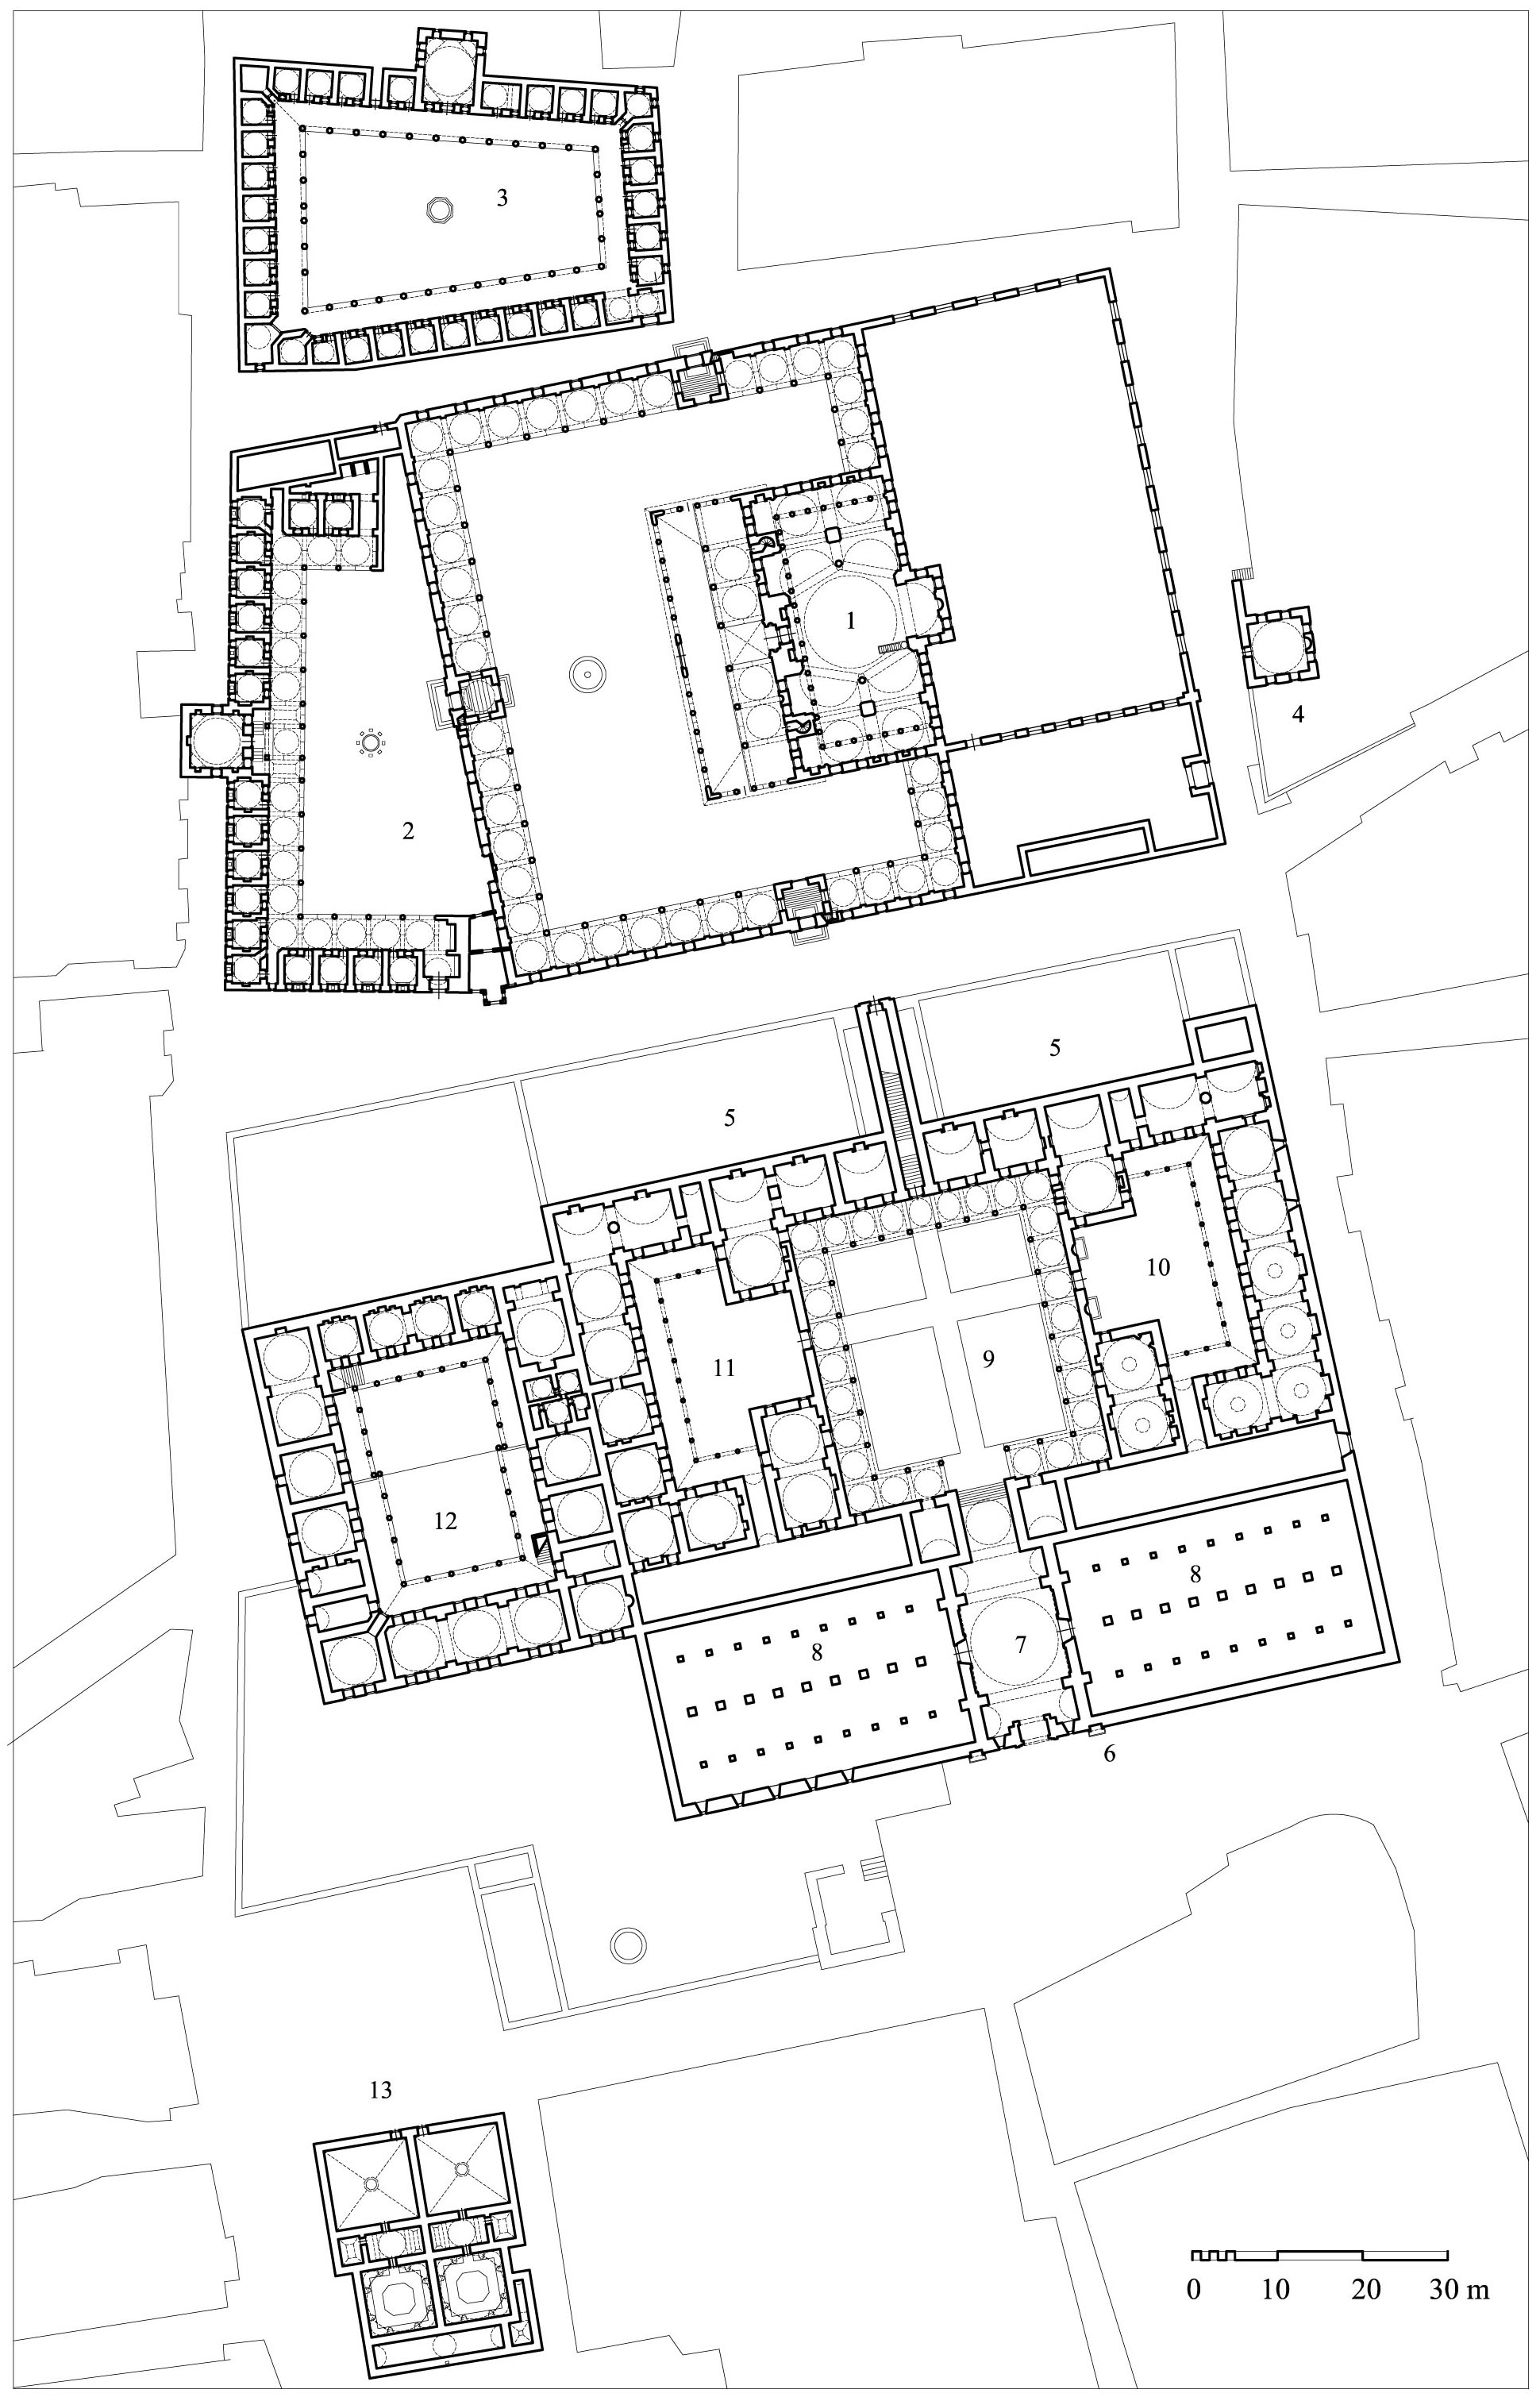 Atik Valide Külliyesi - Floor plan of complex with a hypothetical reconstruction of its hospice-caravanserai-hospital block: (1) mosque, (2) madrasa, (3) convent, (4) elementary school, (5) hadith college and Koran recitation school, (6)  fountain of Hasan Cavus, (7) vestibule, (8) double caravanserai with stables, (9) hospice courtyard, (10) hospice kitchens, (11)  guestrooms, (12) hospital, (13) double bath. DWG file in AutoCAD 2000 format. Click the download button to download a zipped file containing the .dwg file.